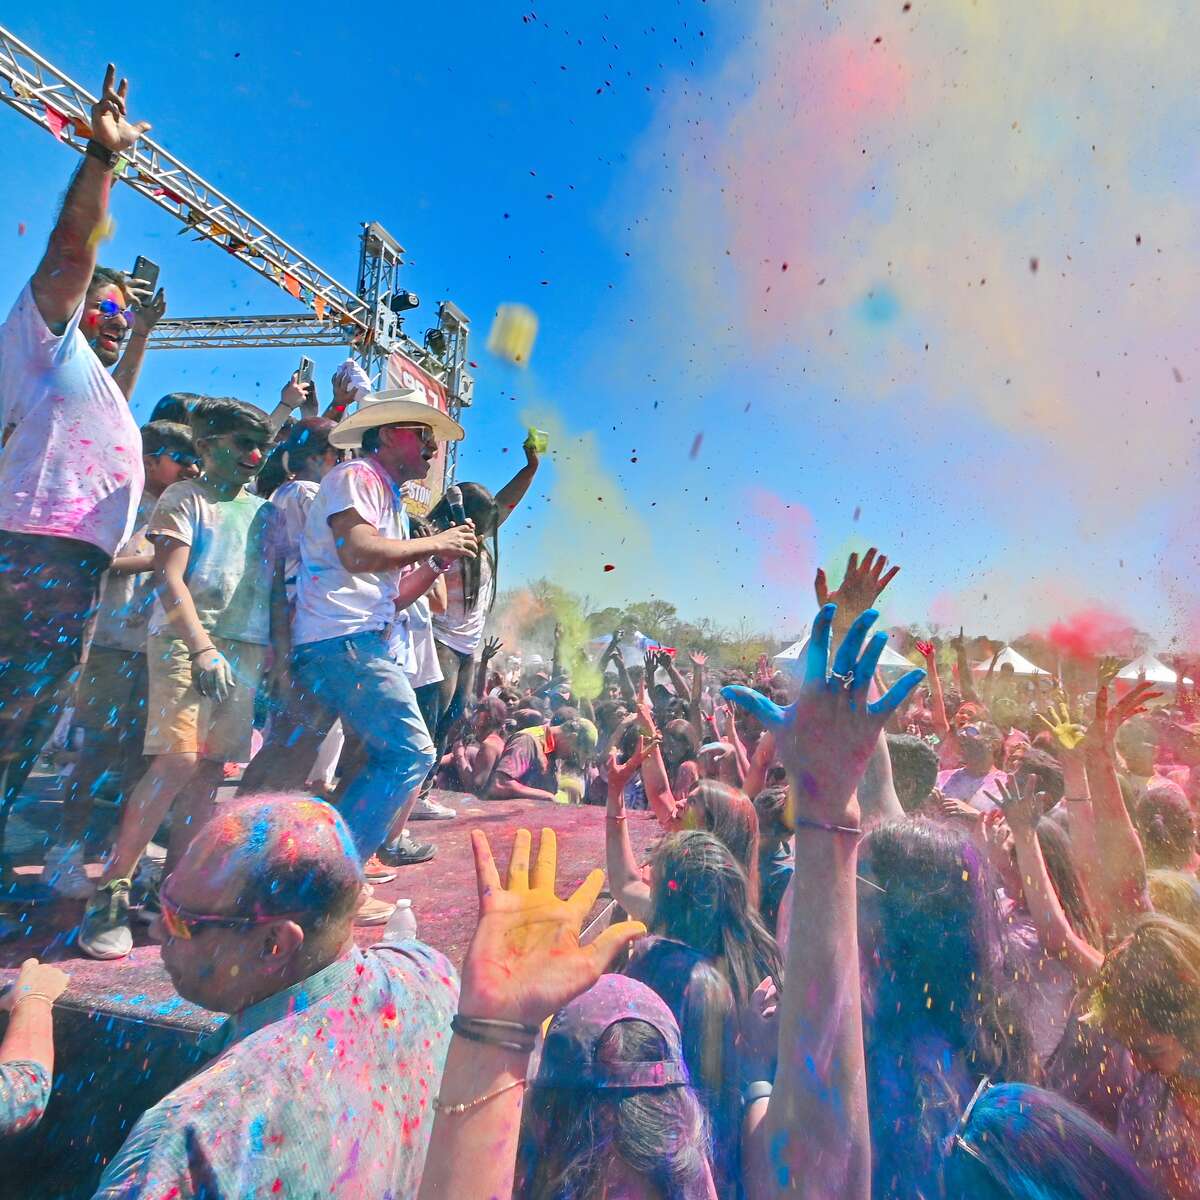 Vibrant colors are thrown as part of Holi festivities. 